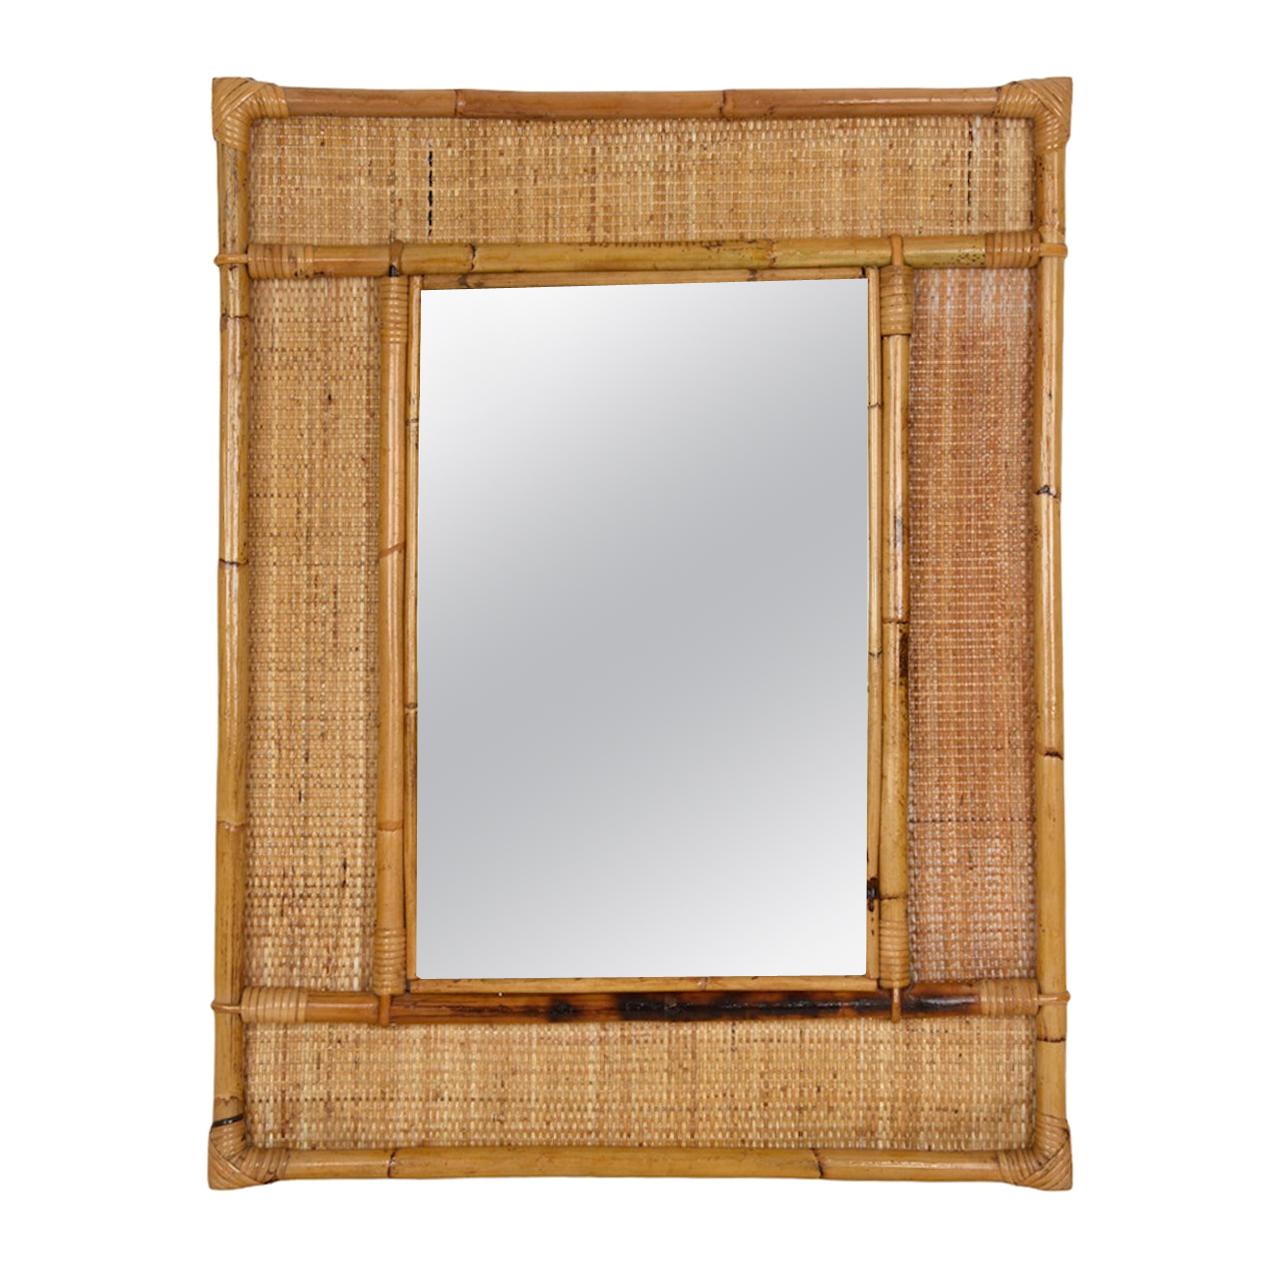 Midcentury Rectangular Italian Mirror with Bamboo and Woven Wicker Frame, 1970s